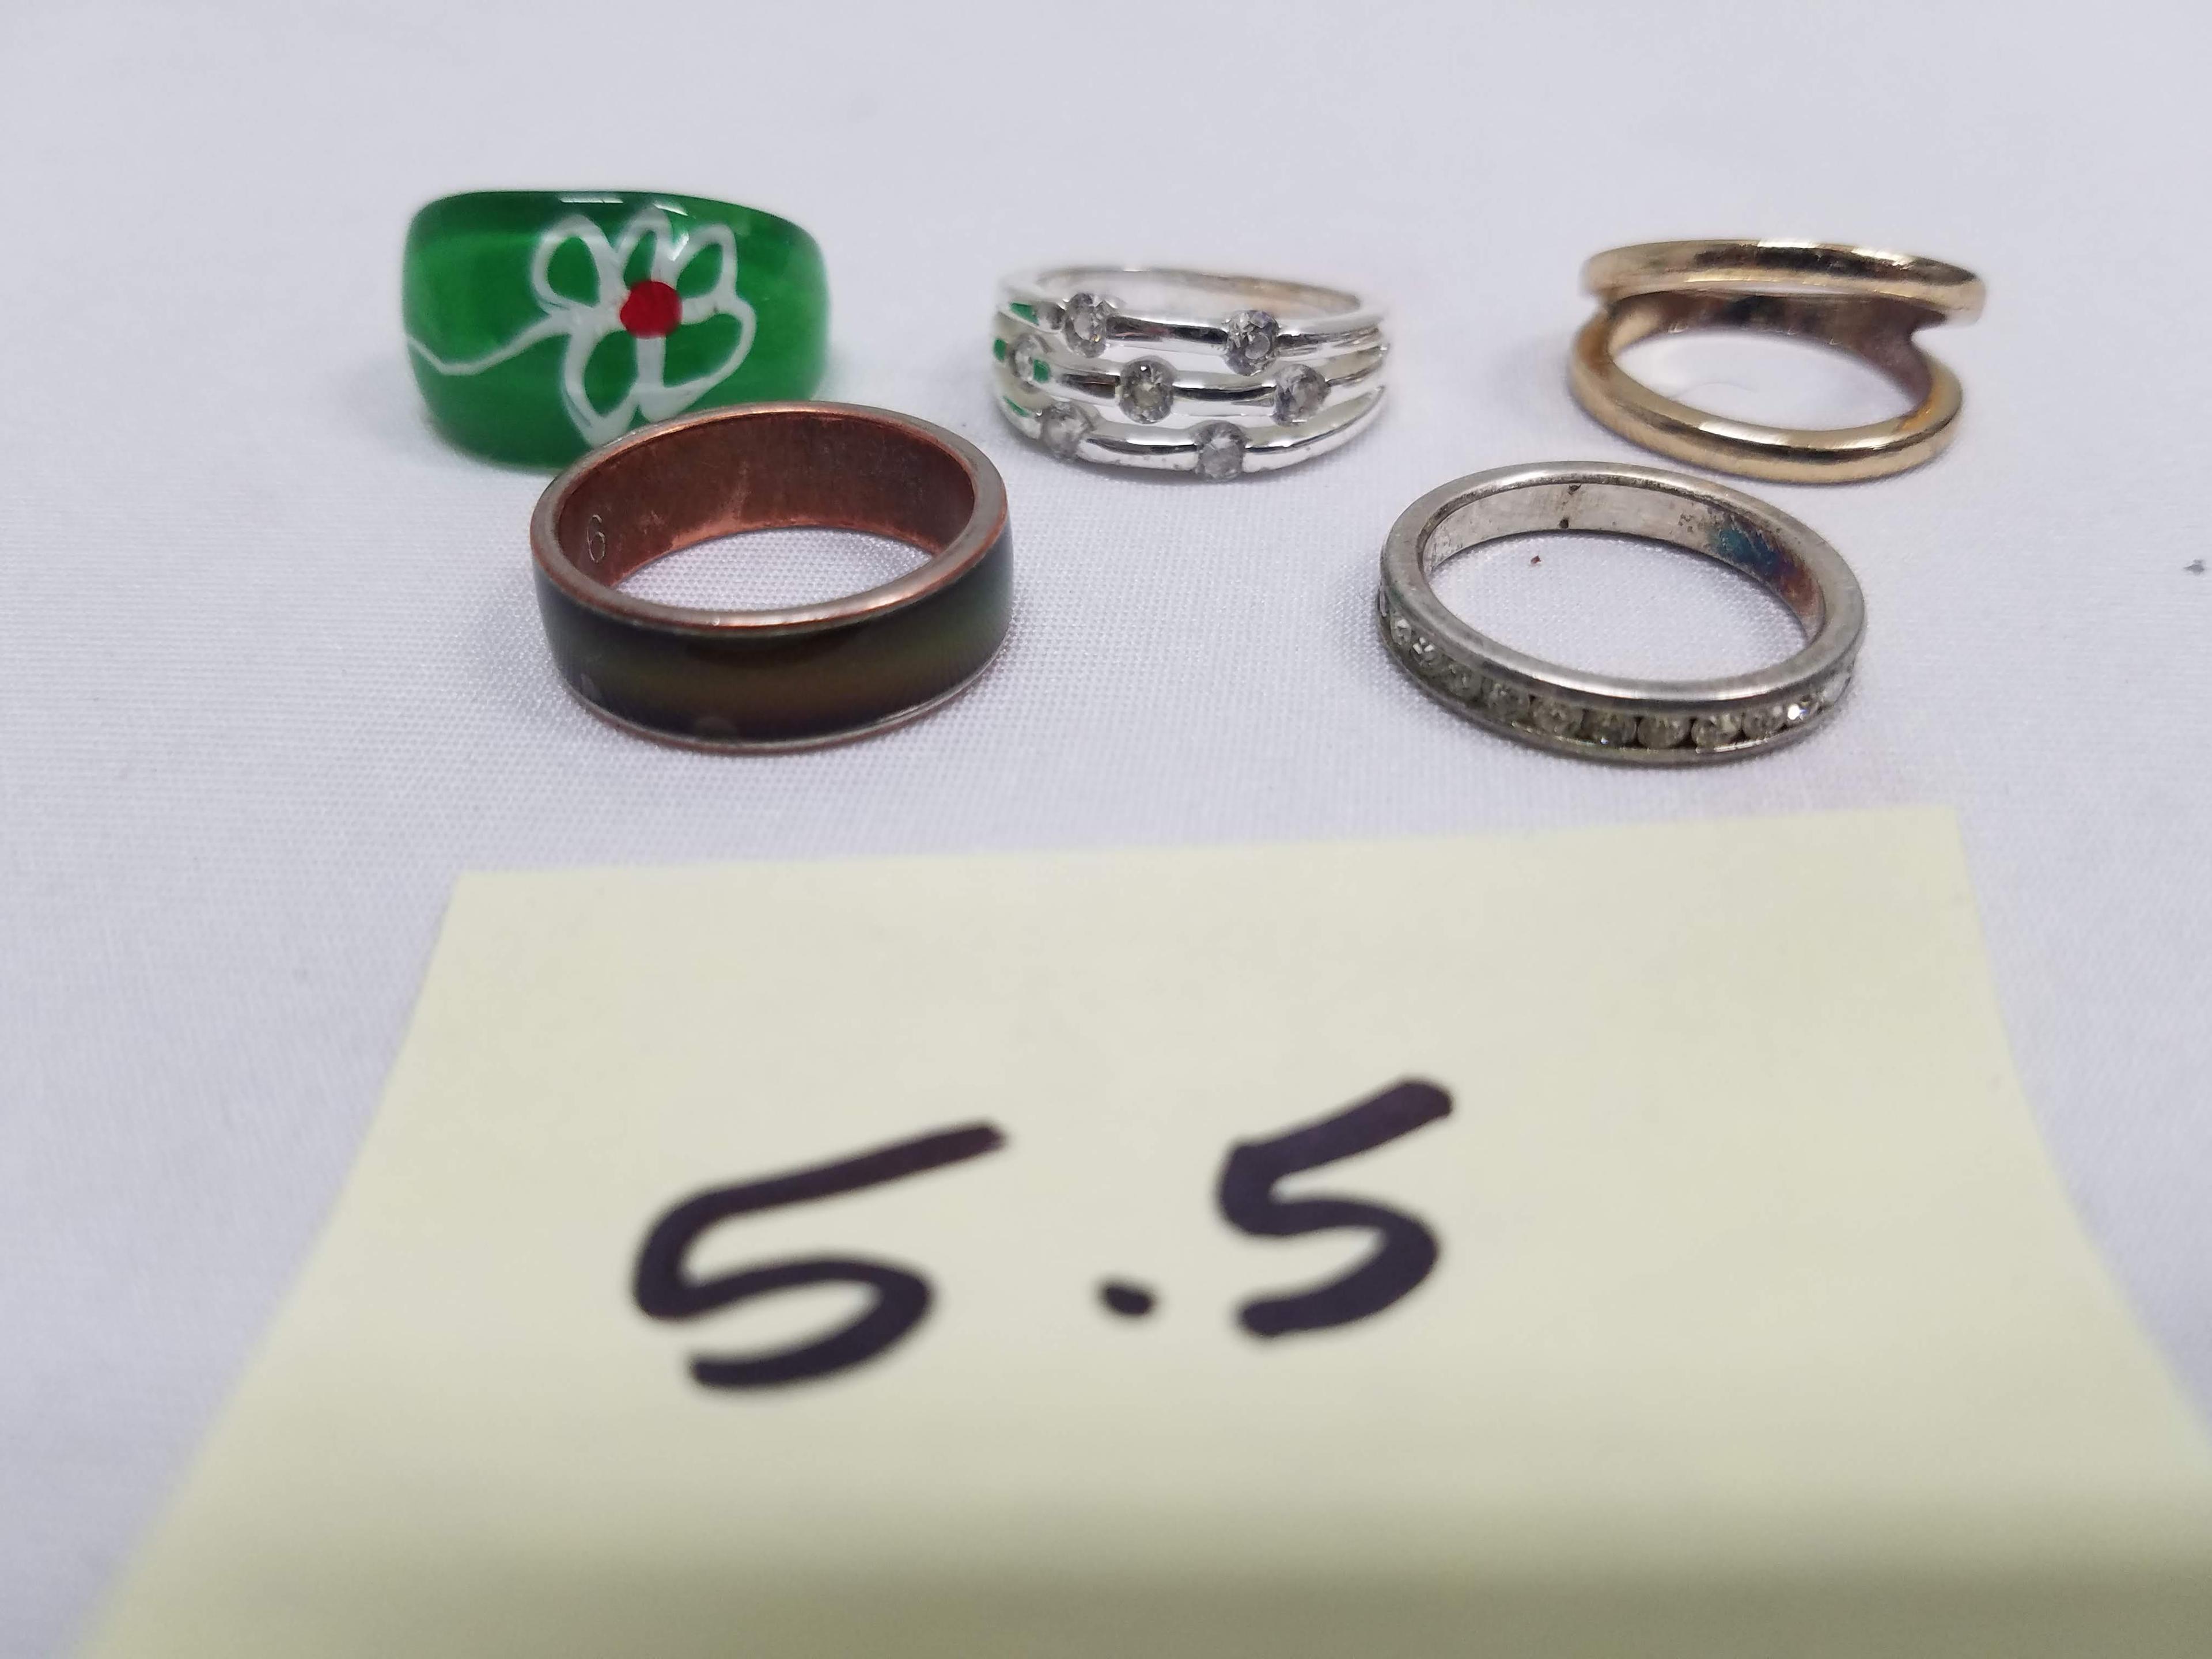 5 Rings size 5.5: 1 Green, 1 "Gold" & 3 "Silver"